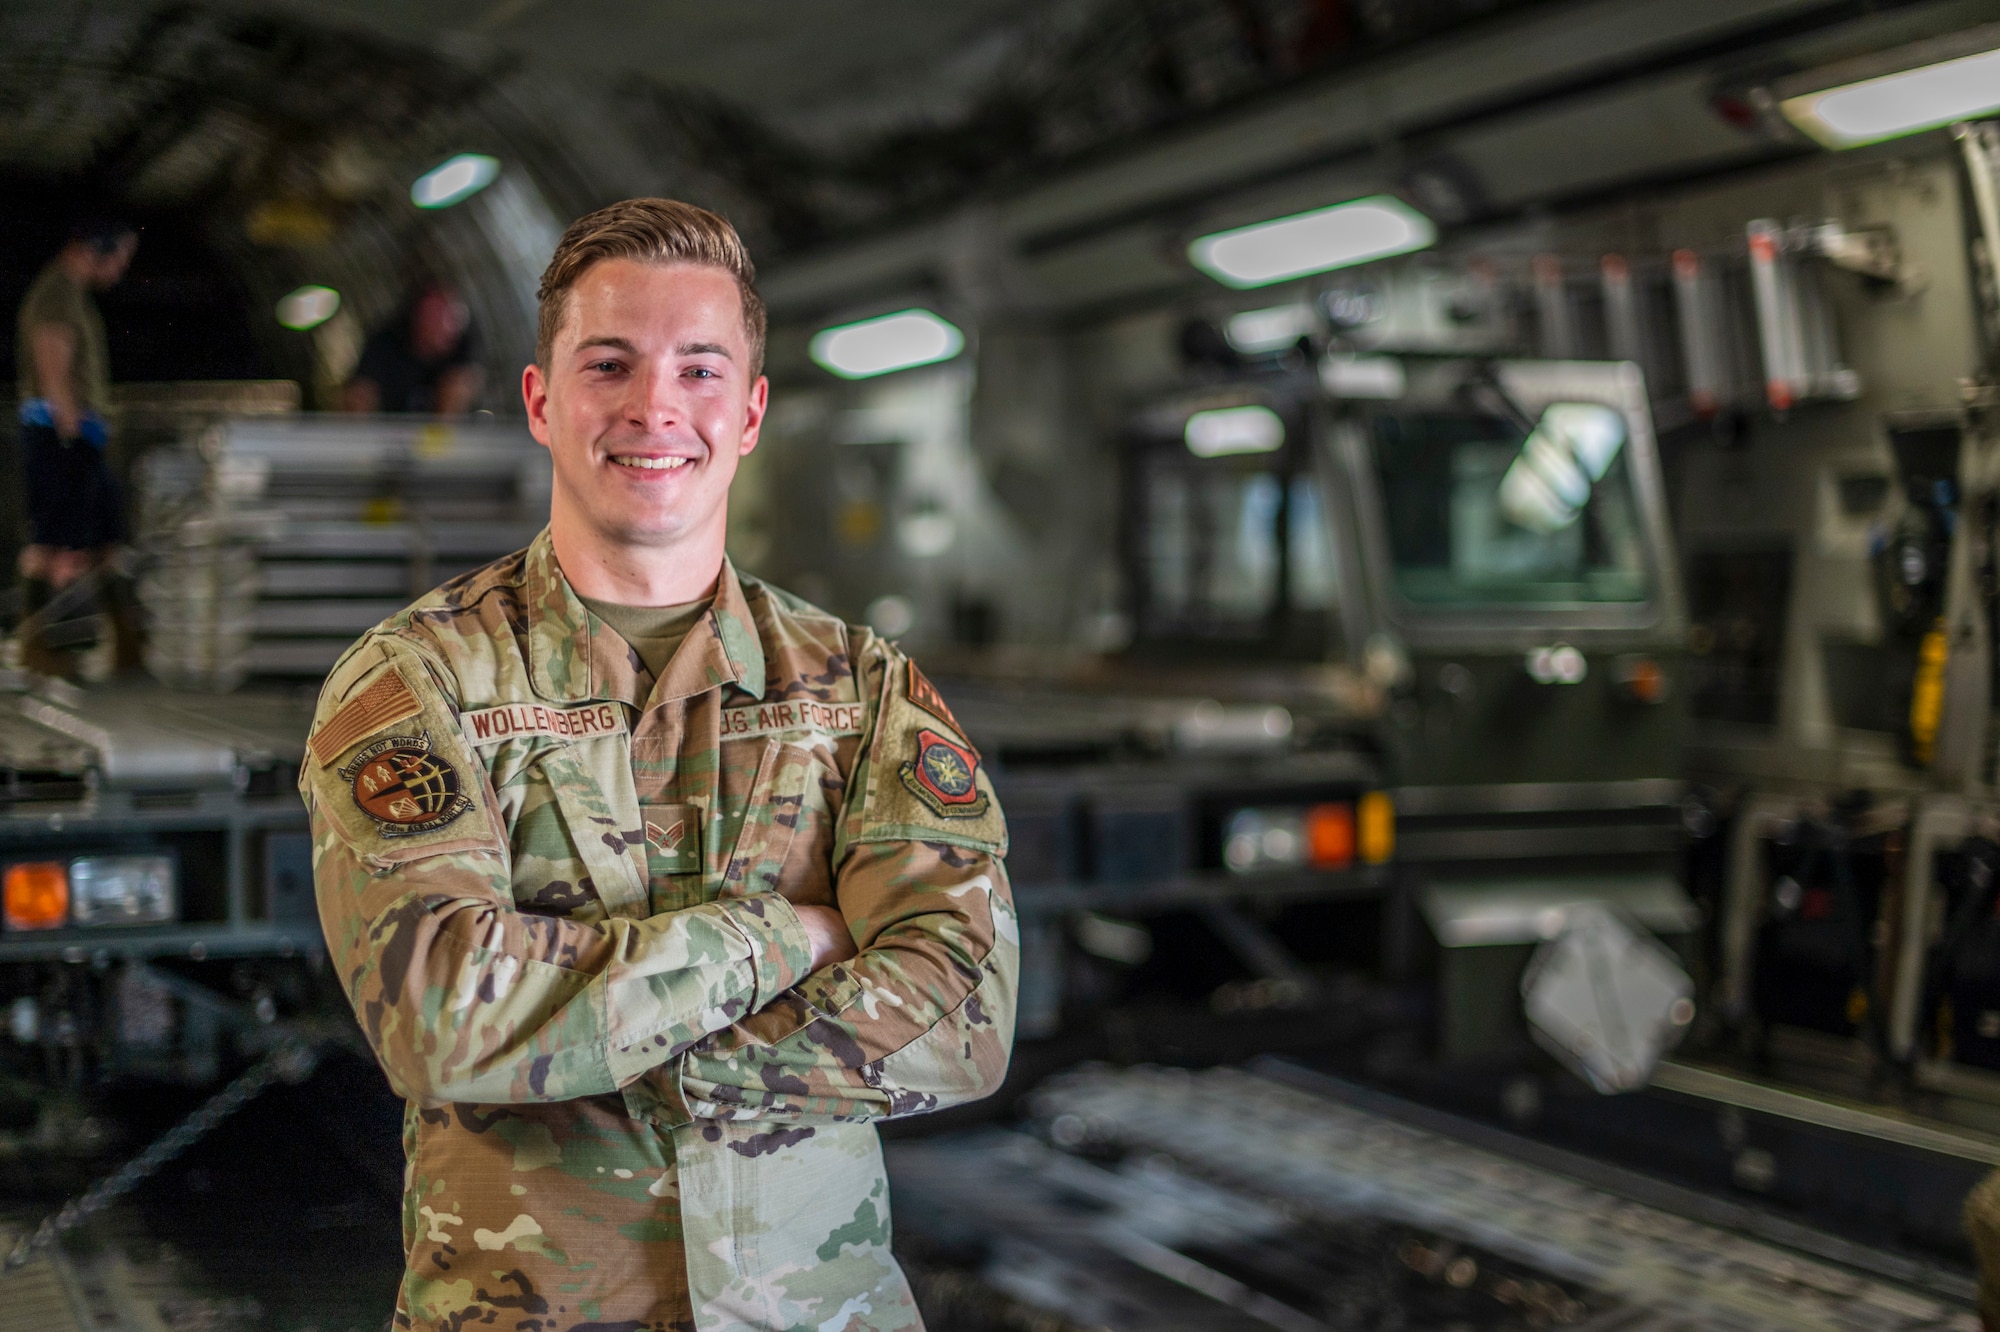 A man poses for a picture in front of a large military vehicle that is used to load pallets on to large military aircraft, in side of a C-17 Globemaster III, a large Air Force aircraft.